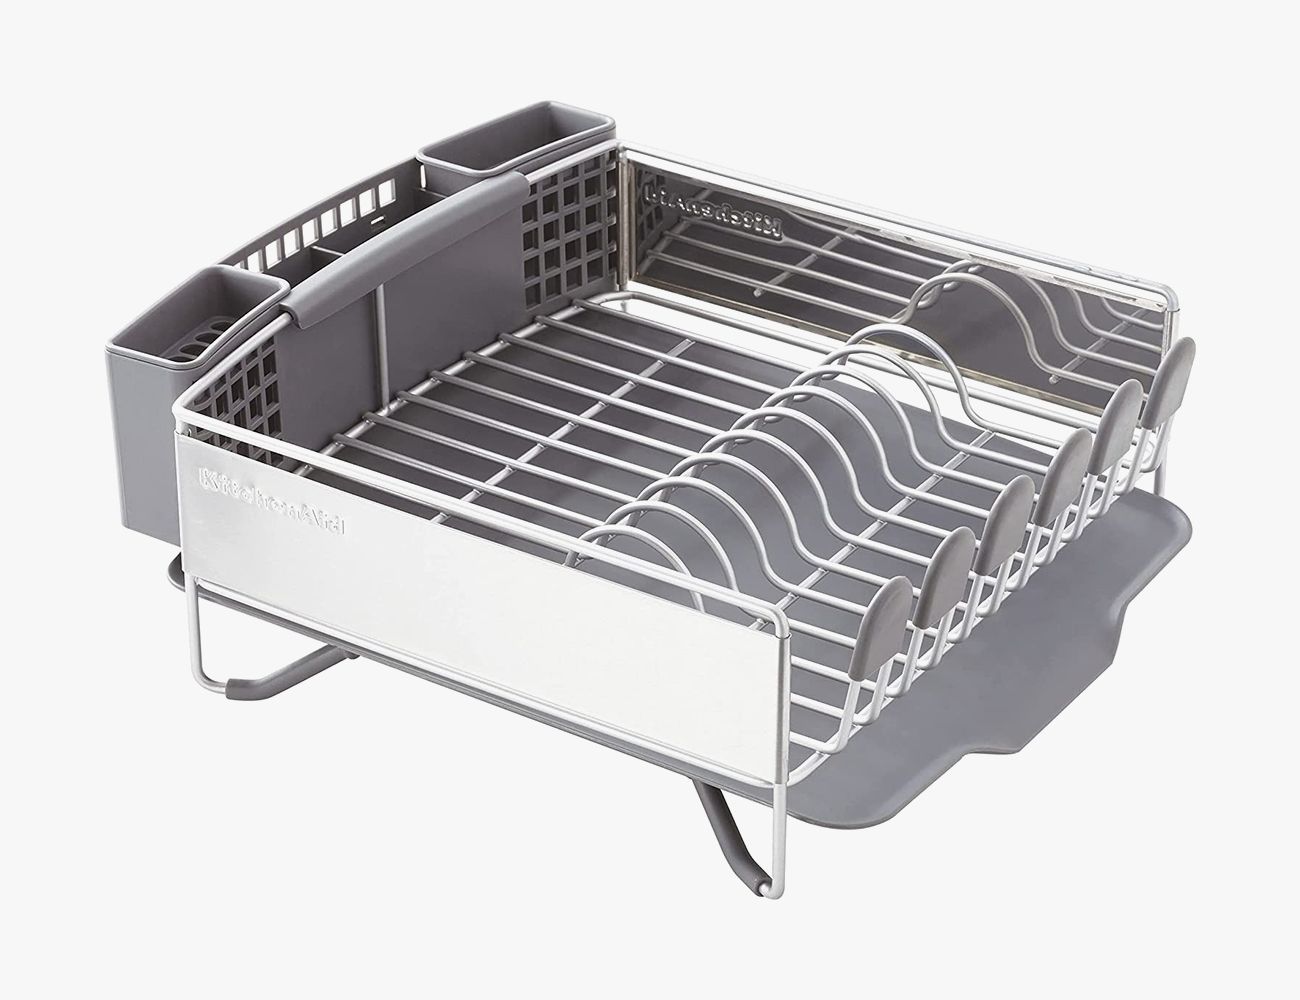 https://hips.hearstapps.com/vader-prod.s3.amazonaws.com/1679935315-kitchenaid-compact-stainless-steel-dish-rack-6421c74a1e0be.jpg